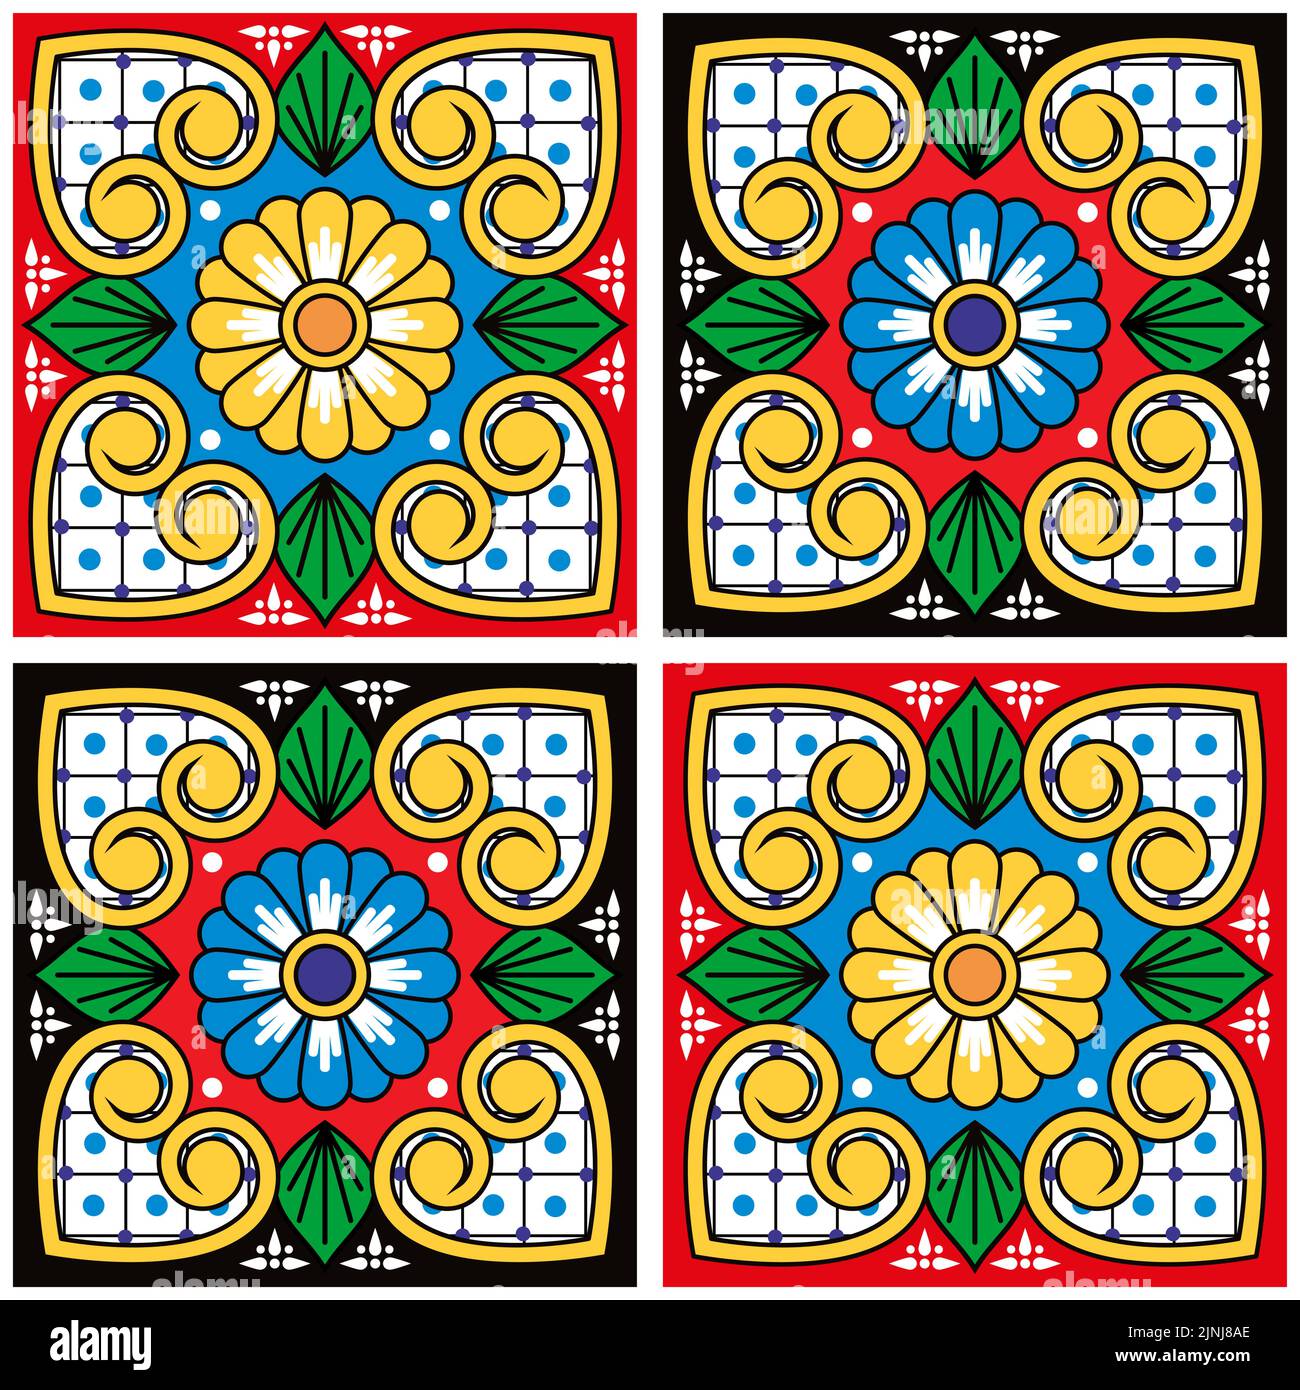 Ceramic talavera tile vector seamless pattern with flowers and leaves, repetitive design styled as Mexican ornamental tiles Stock Vector